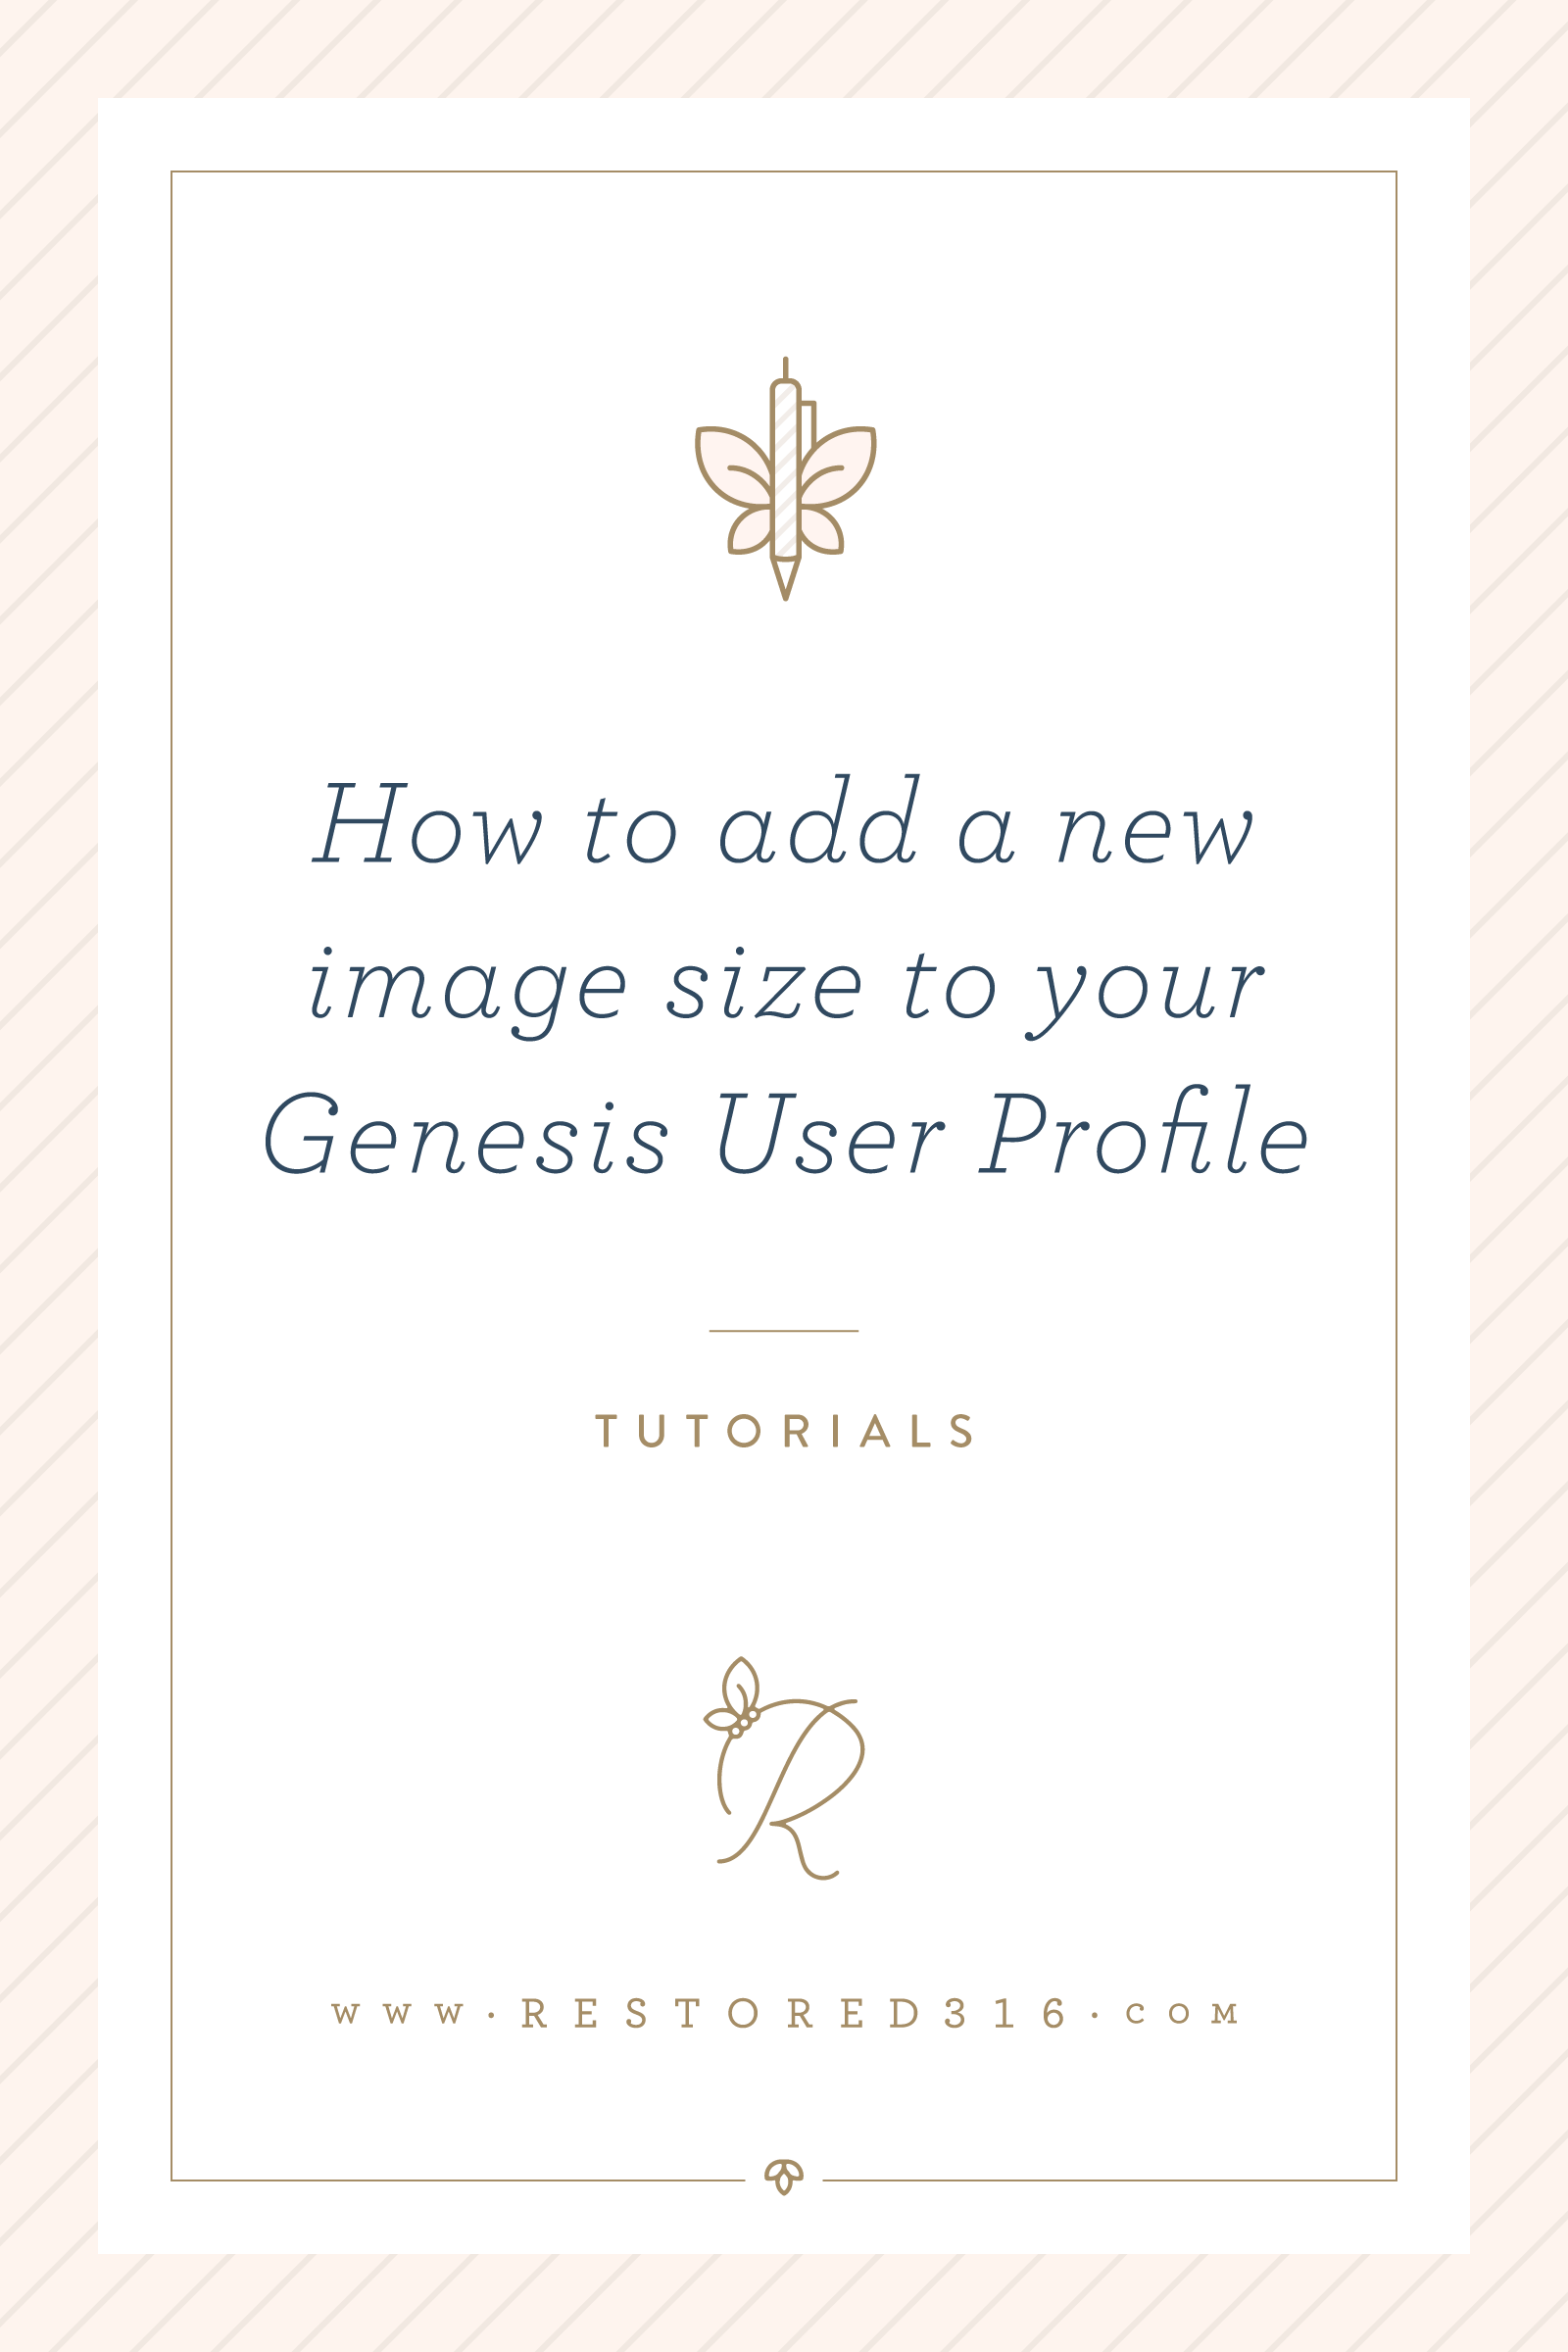 How to add a new image size to your Genesis User Profile widget